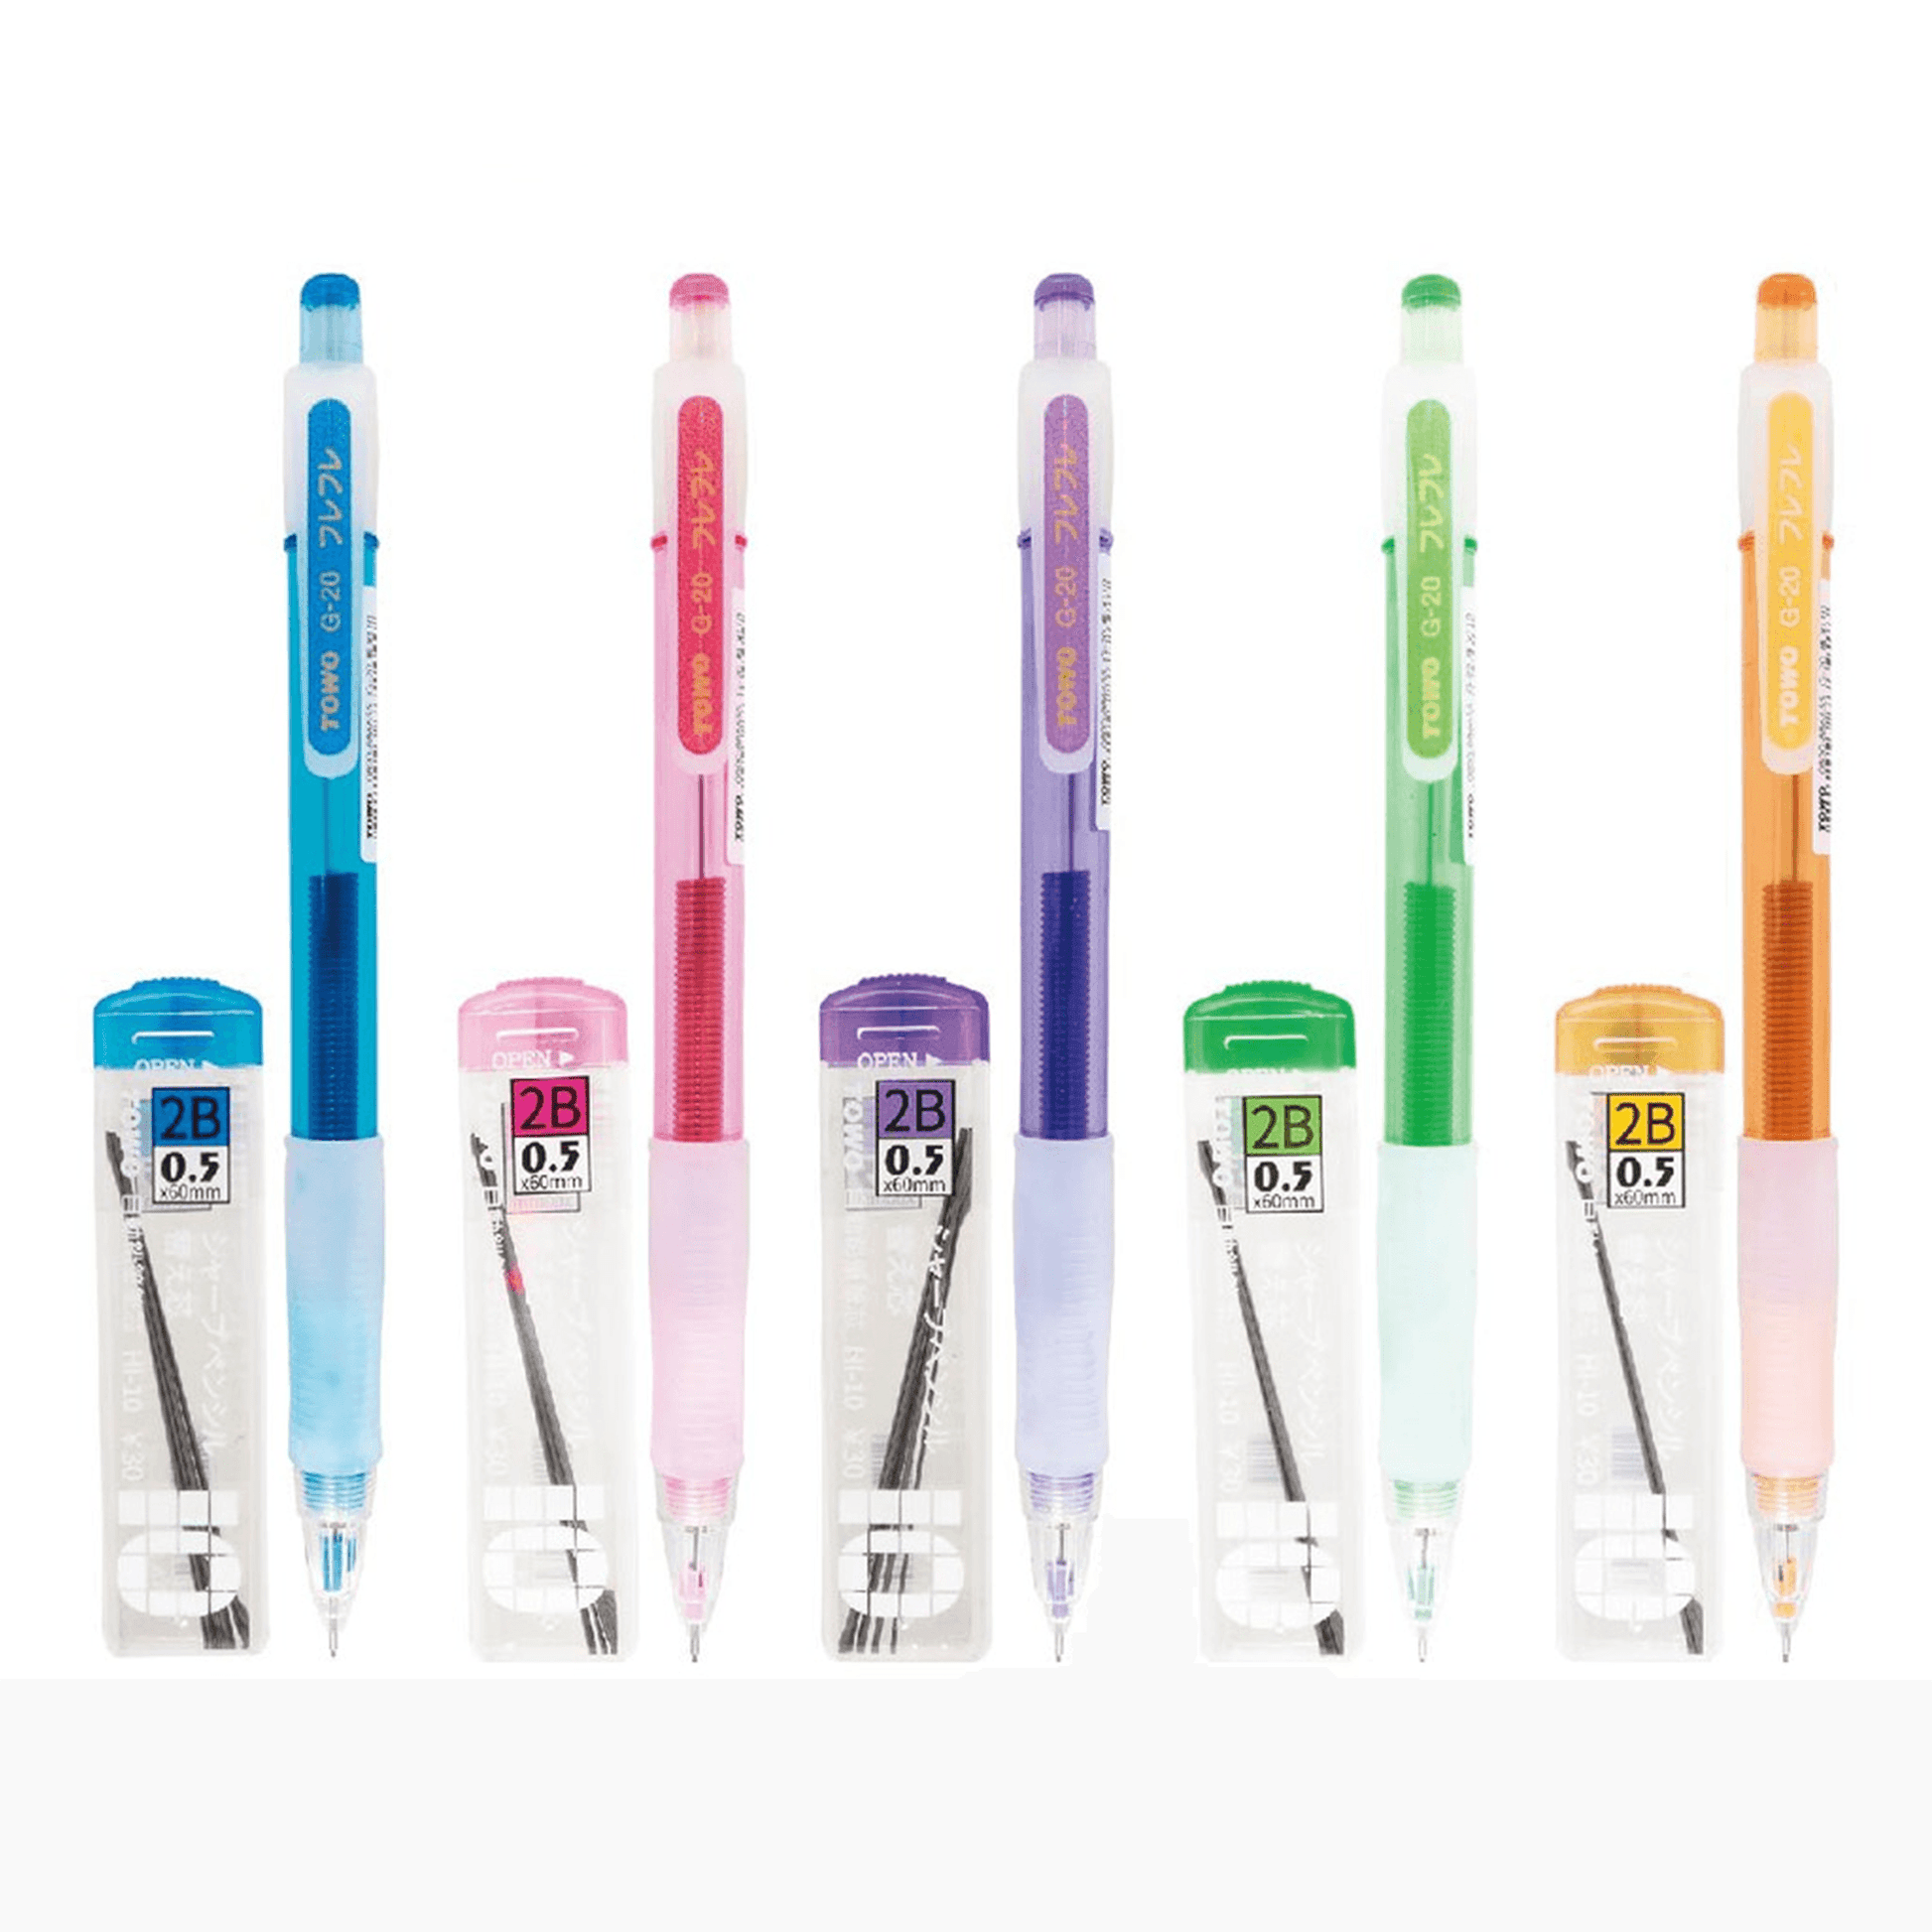 Mechanical Pencil + Refill TOWO Rocker Pen Stationery Student Teenager School Office' 0.5mm 2B Value Combination G-20 - CHL-STORE 